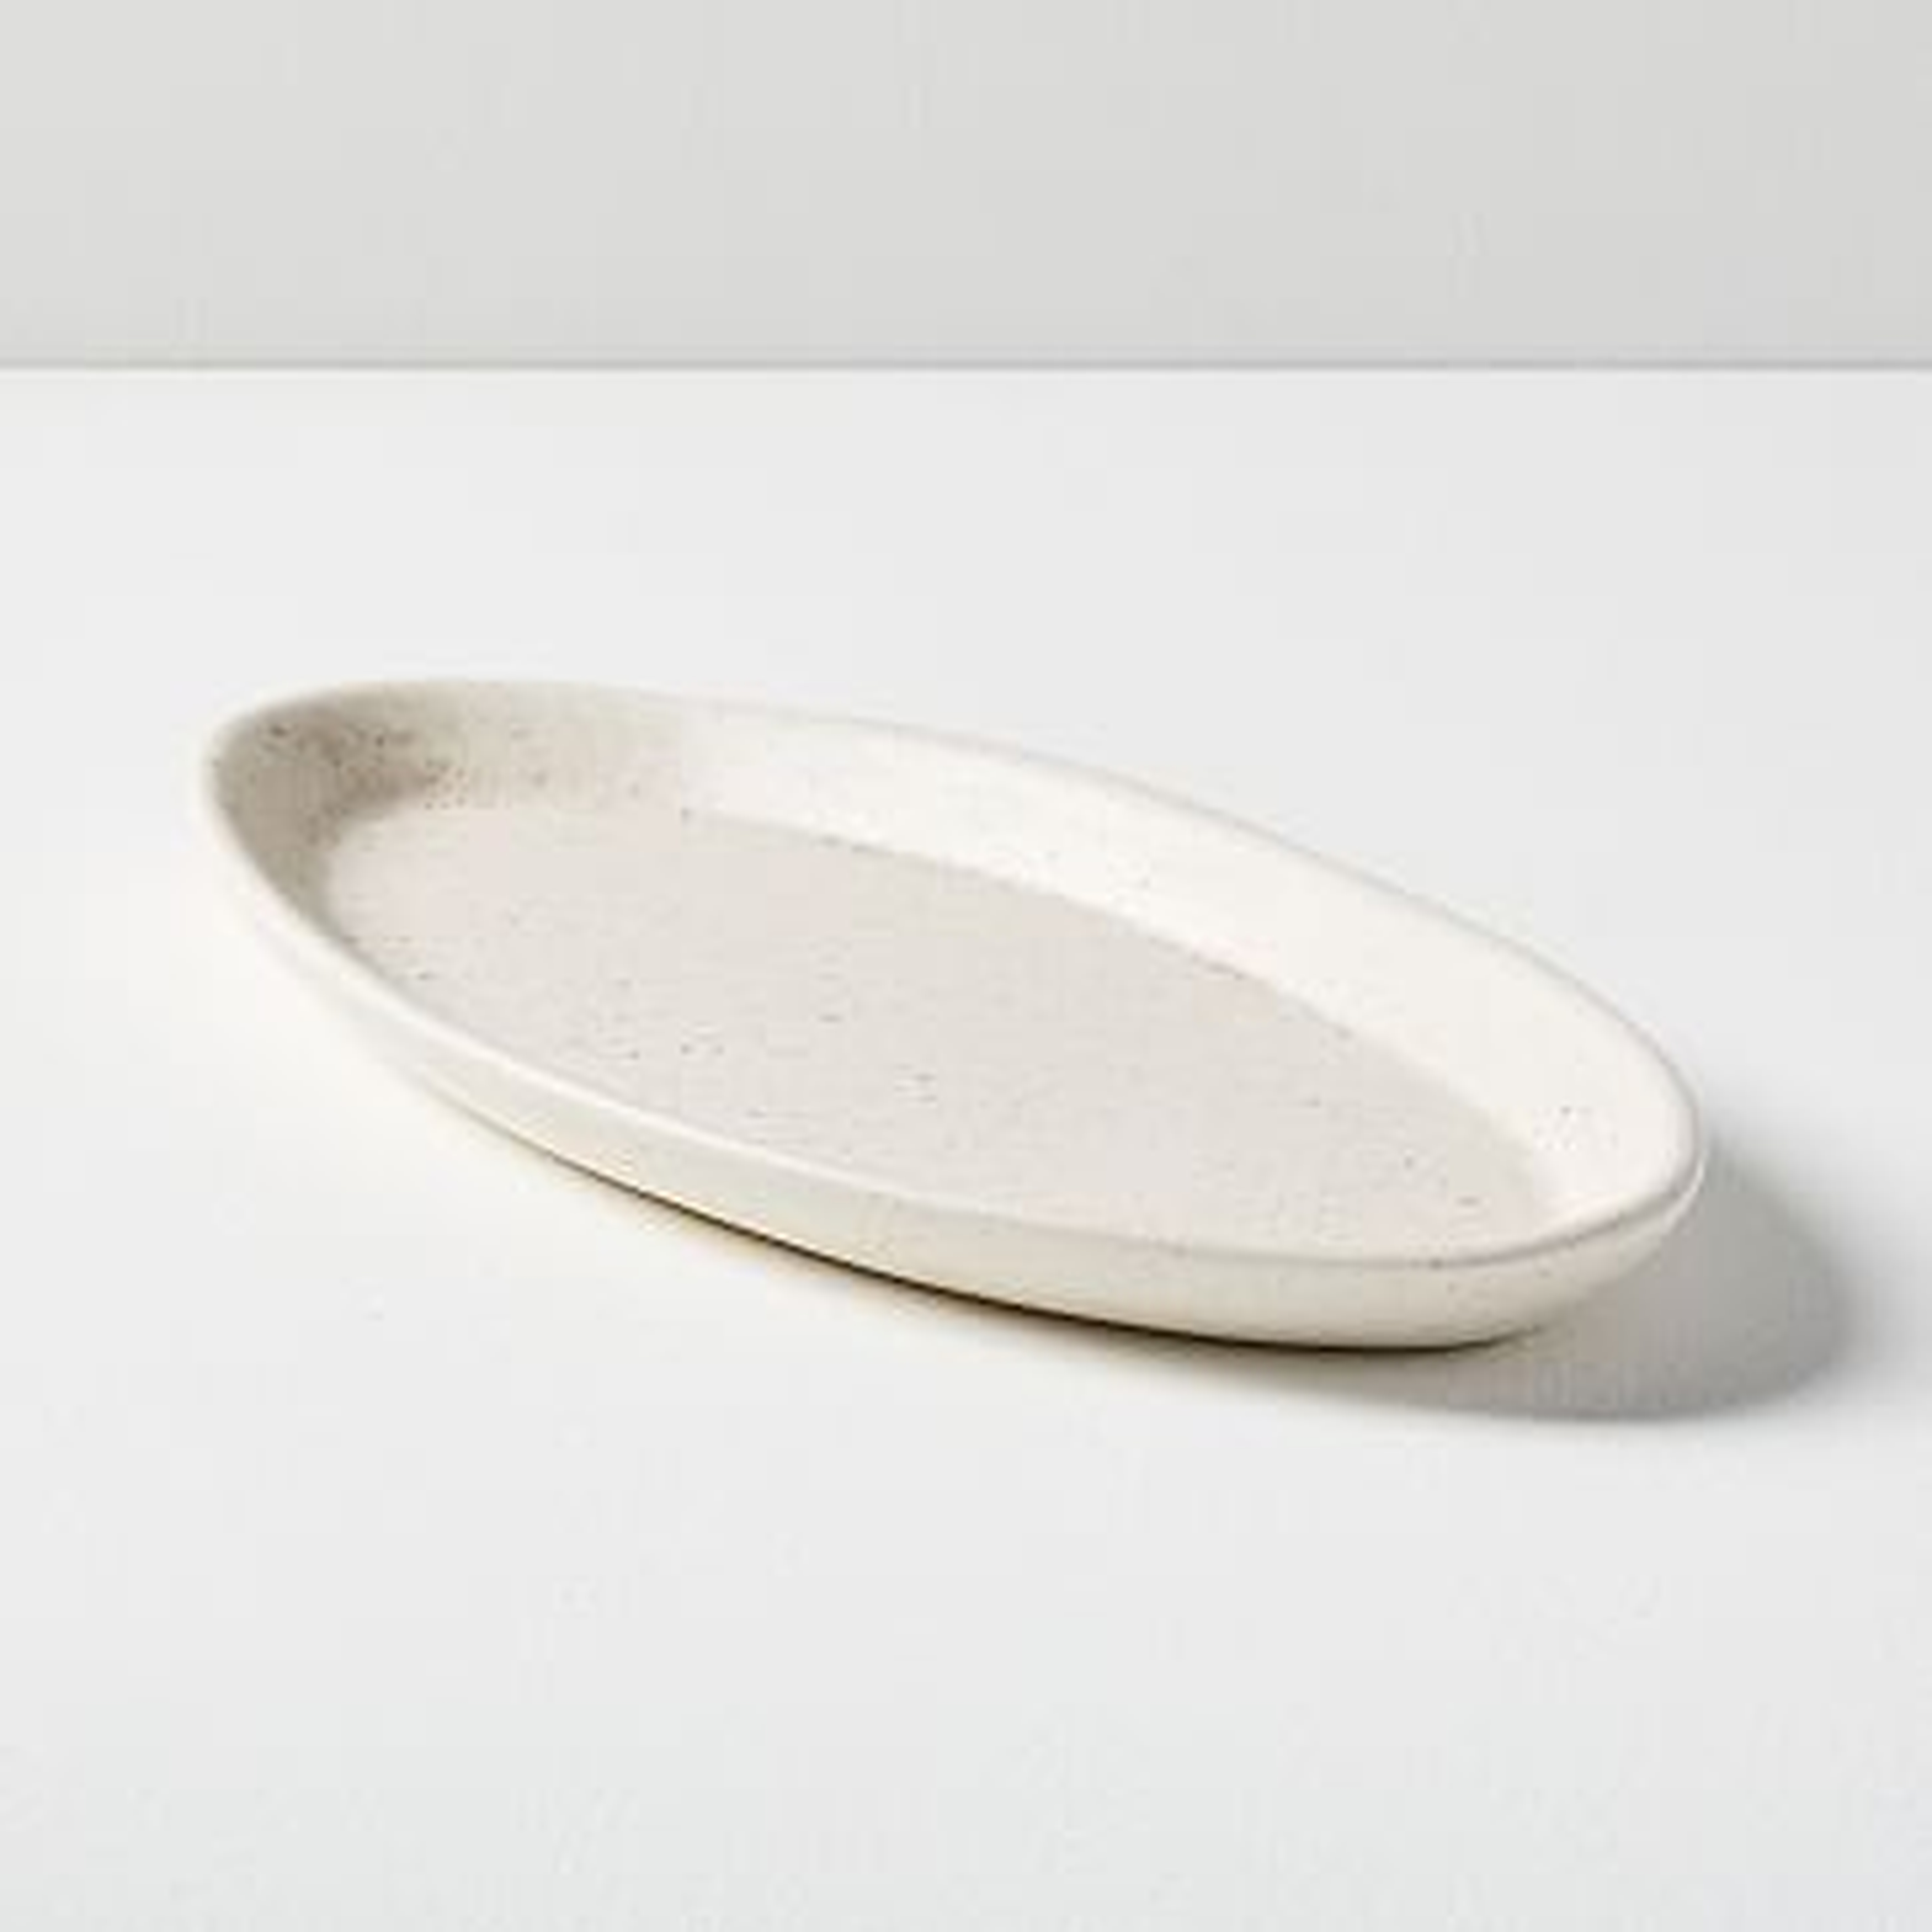 Paper + Clay Oval Catchall, Speckled Cream - West Elm